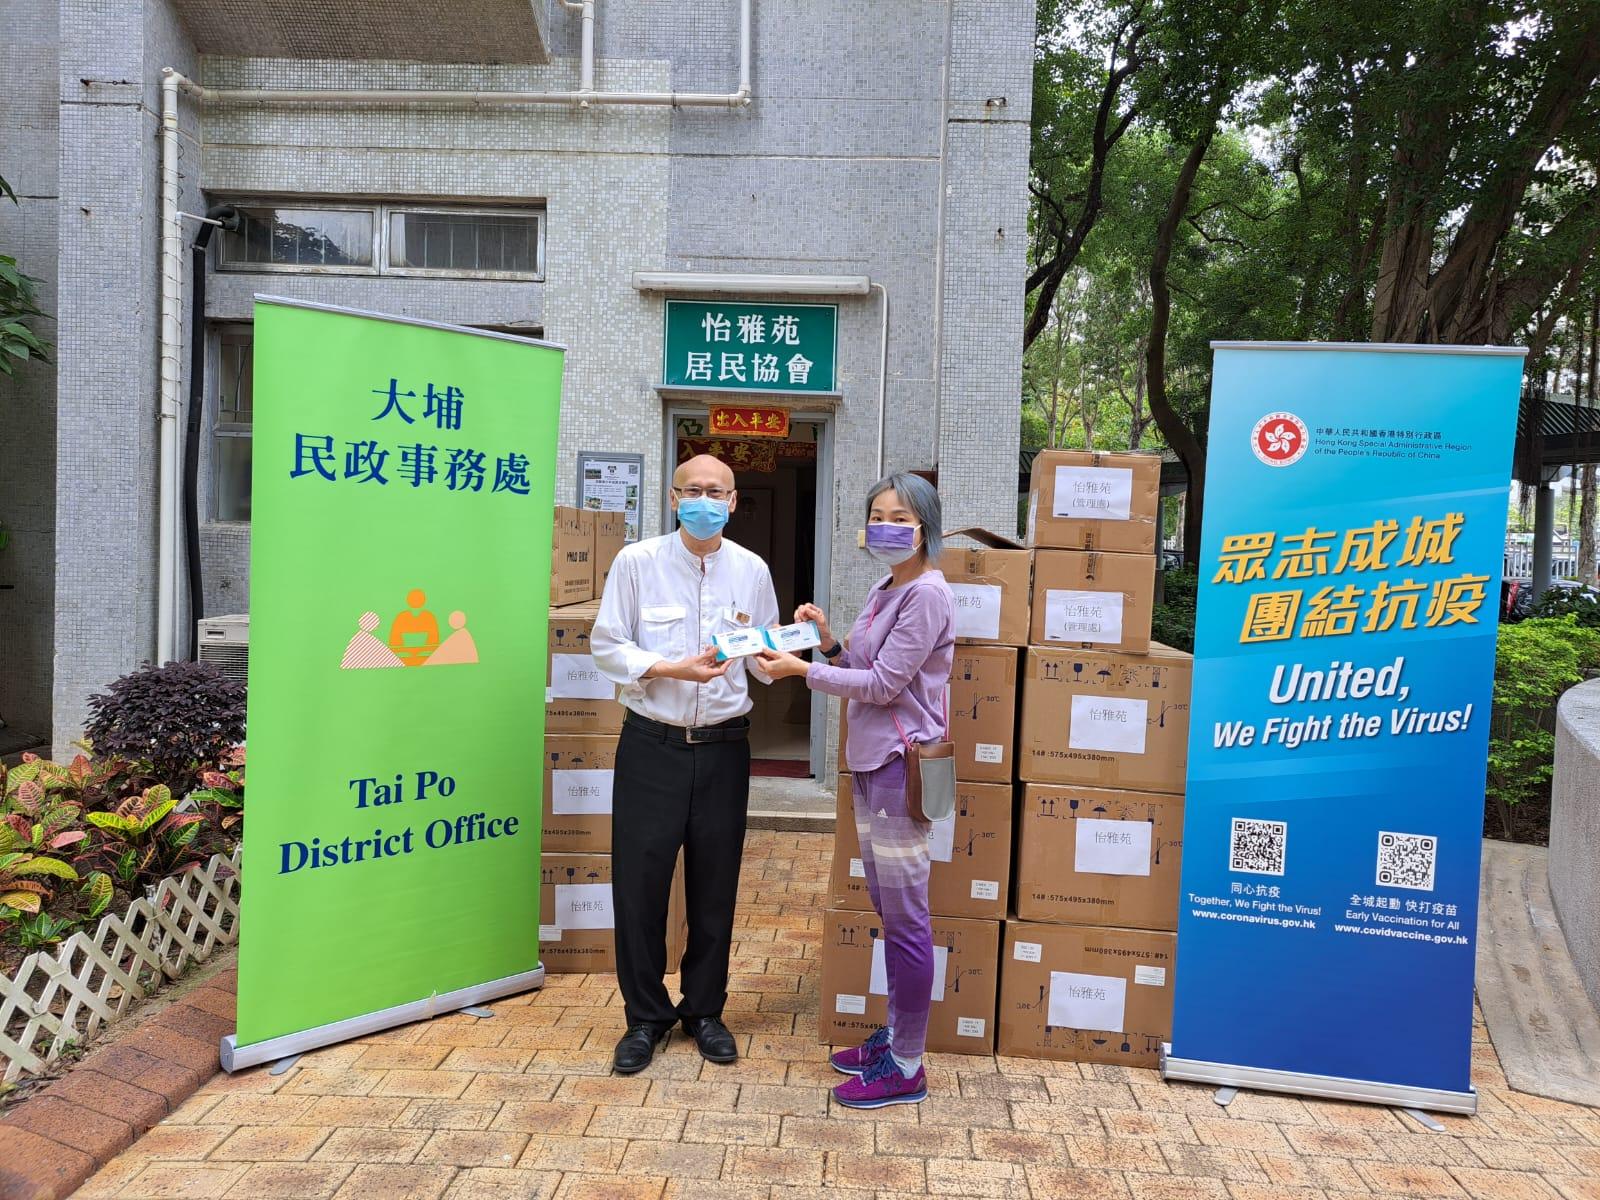 The Tai Po District Office today (April 17) distributed COVID-19 rapid test kits to households, cleansing workers and property management staff living and working in Yee Nga Court for voluntary testing through the property management company.